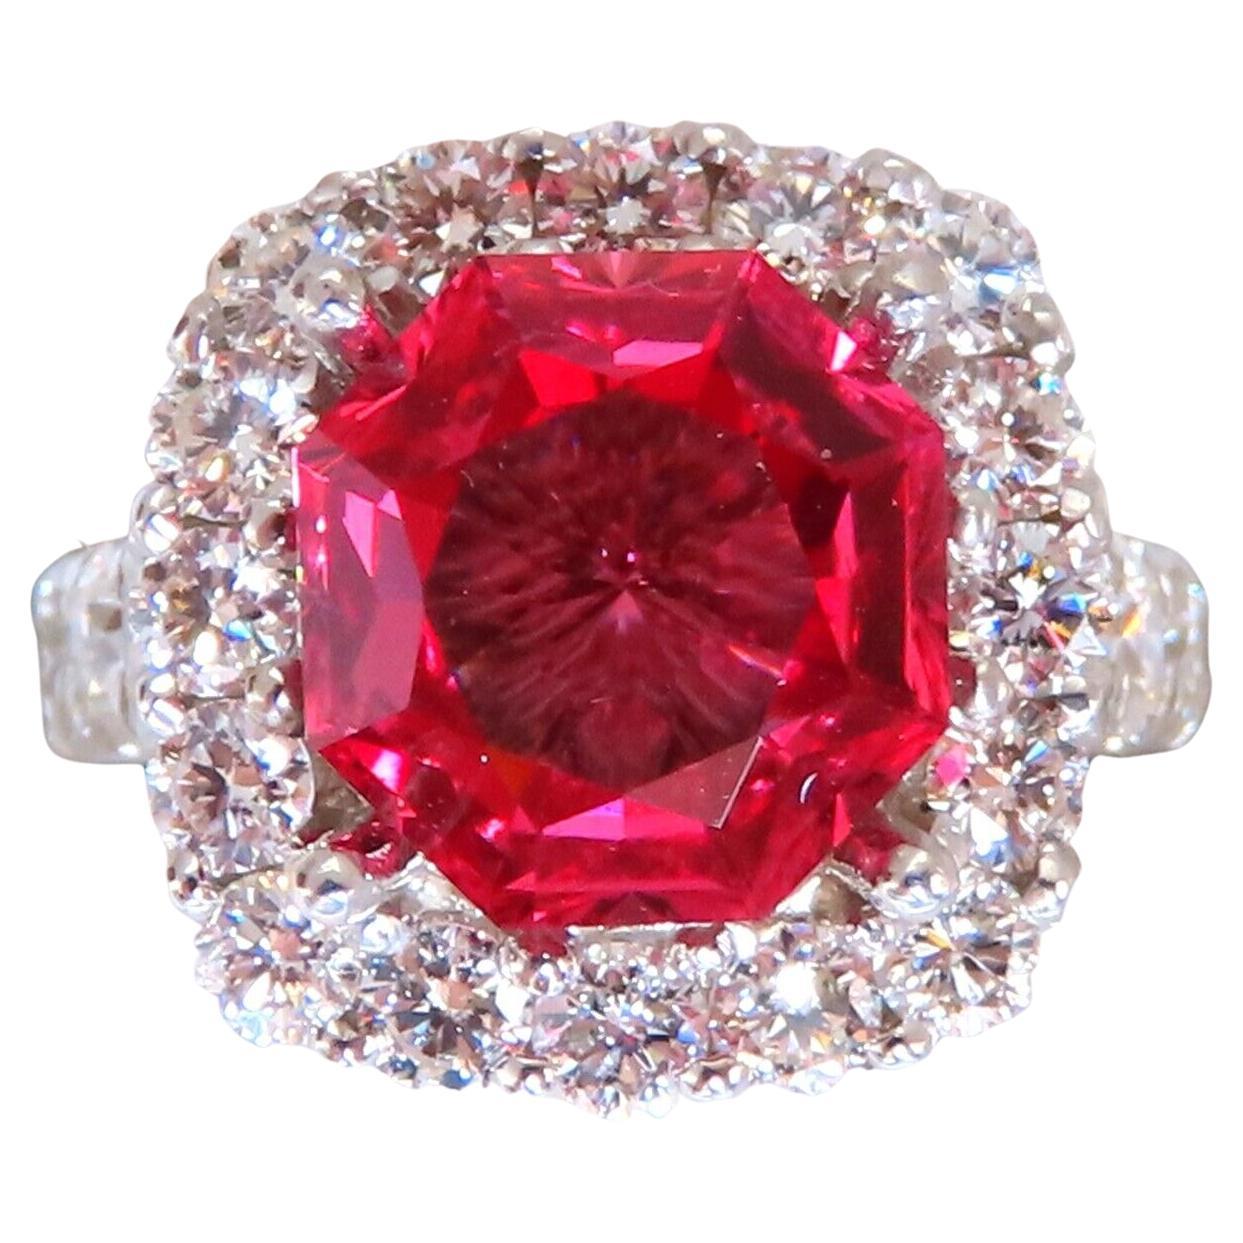 GIA Certified Natural No Heat Spinel 3.86ct Diamonds Cluster Ring 14Kt